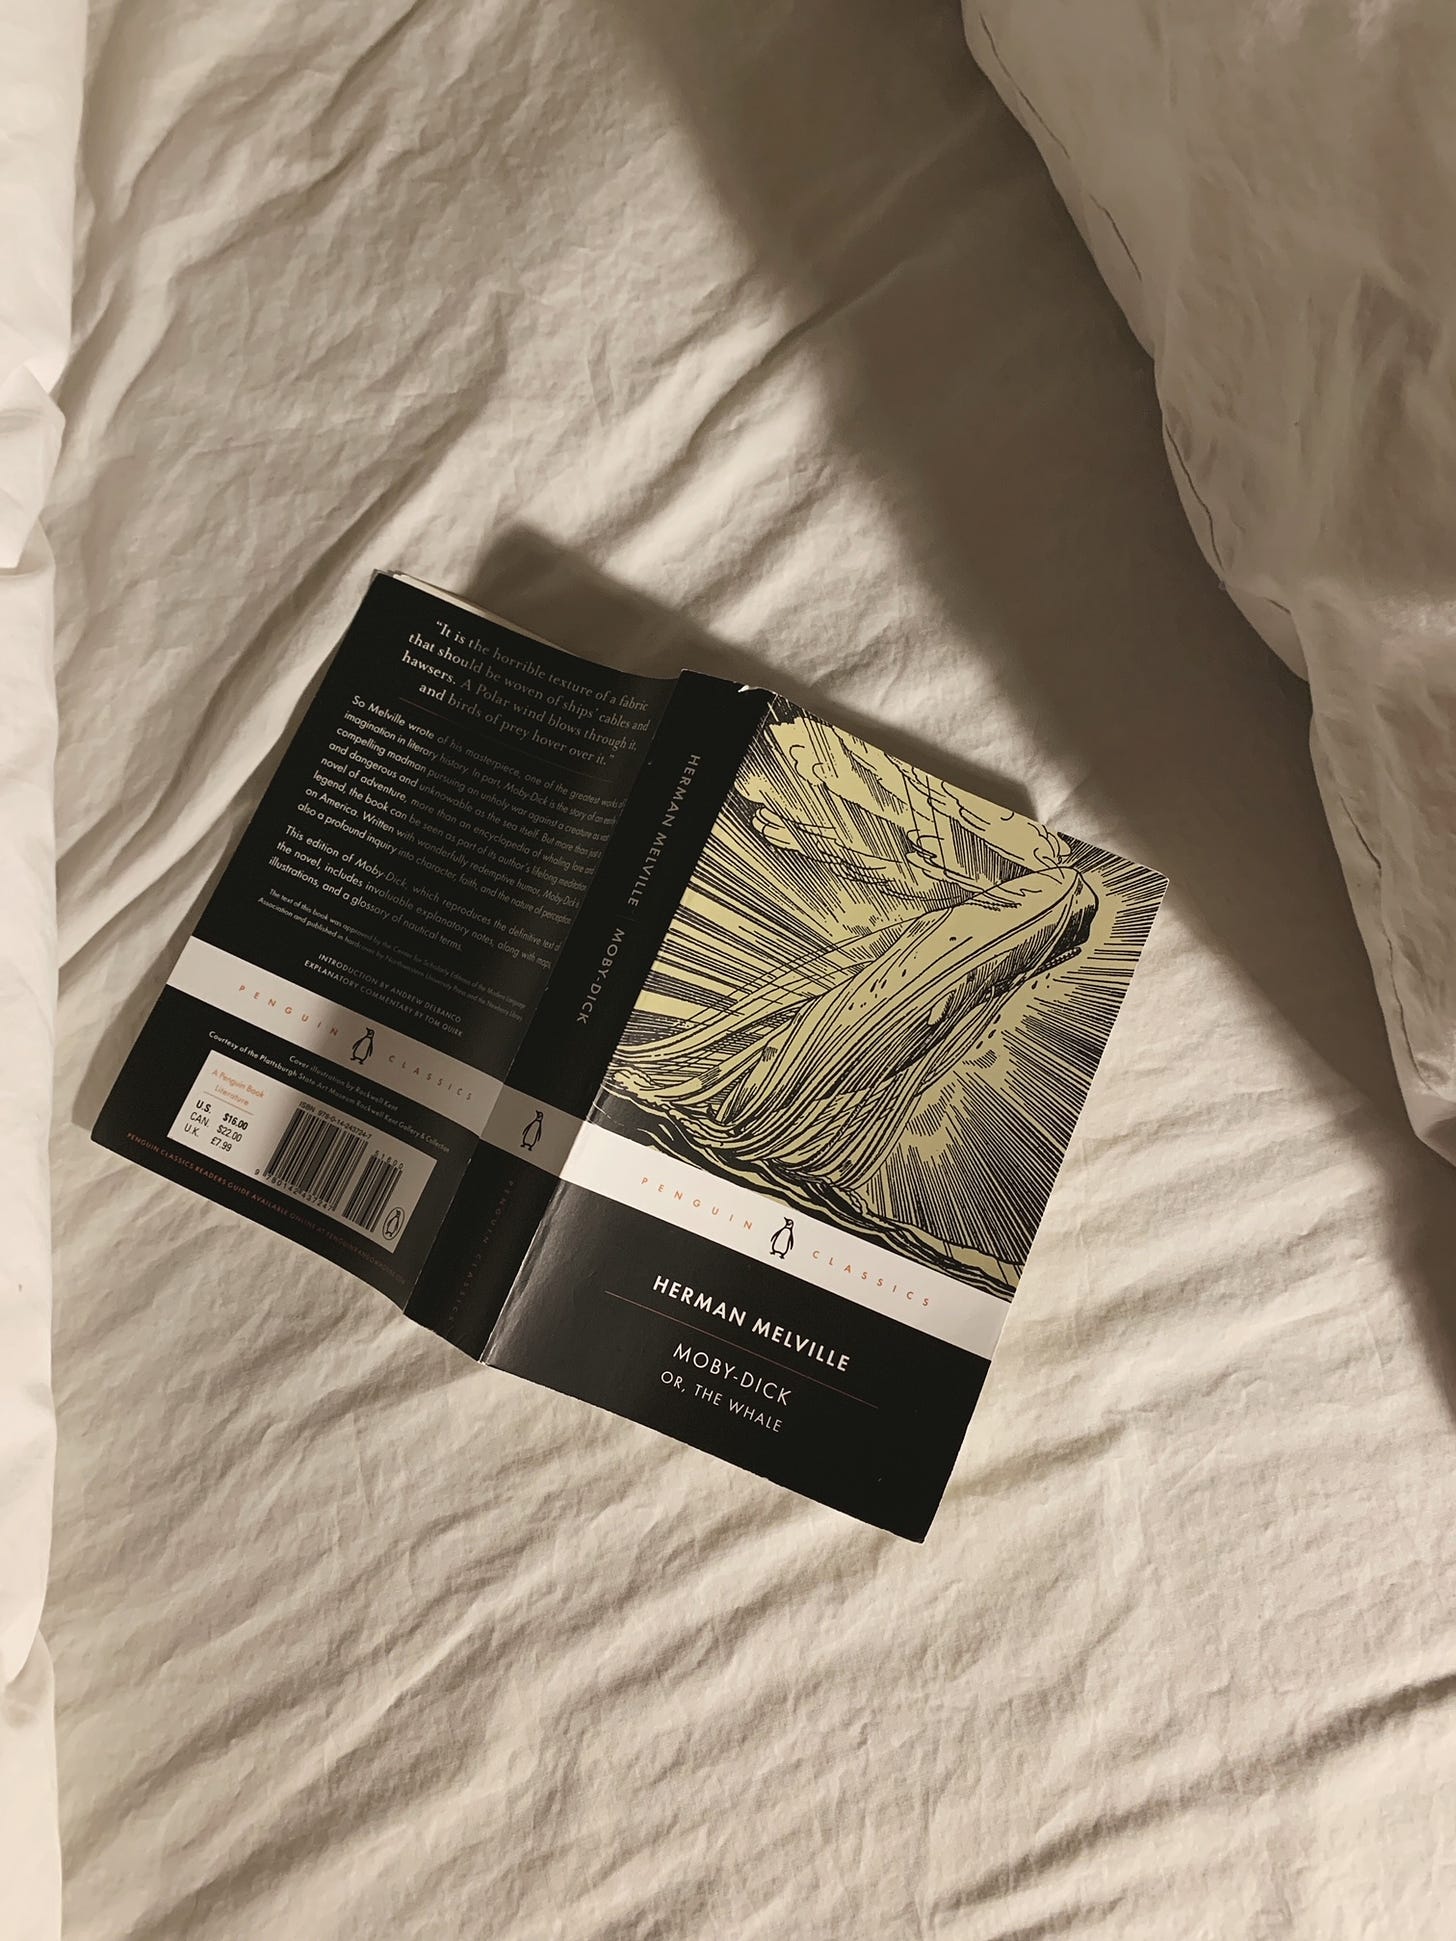 a book lays open on a bed, with over visible; the book is Moby-Dick by Herman Melville.